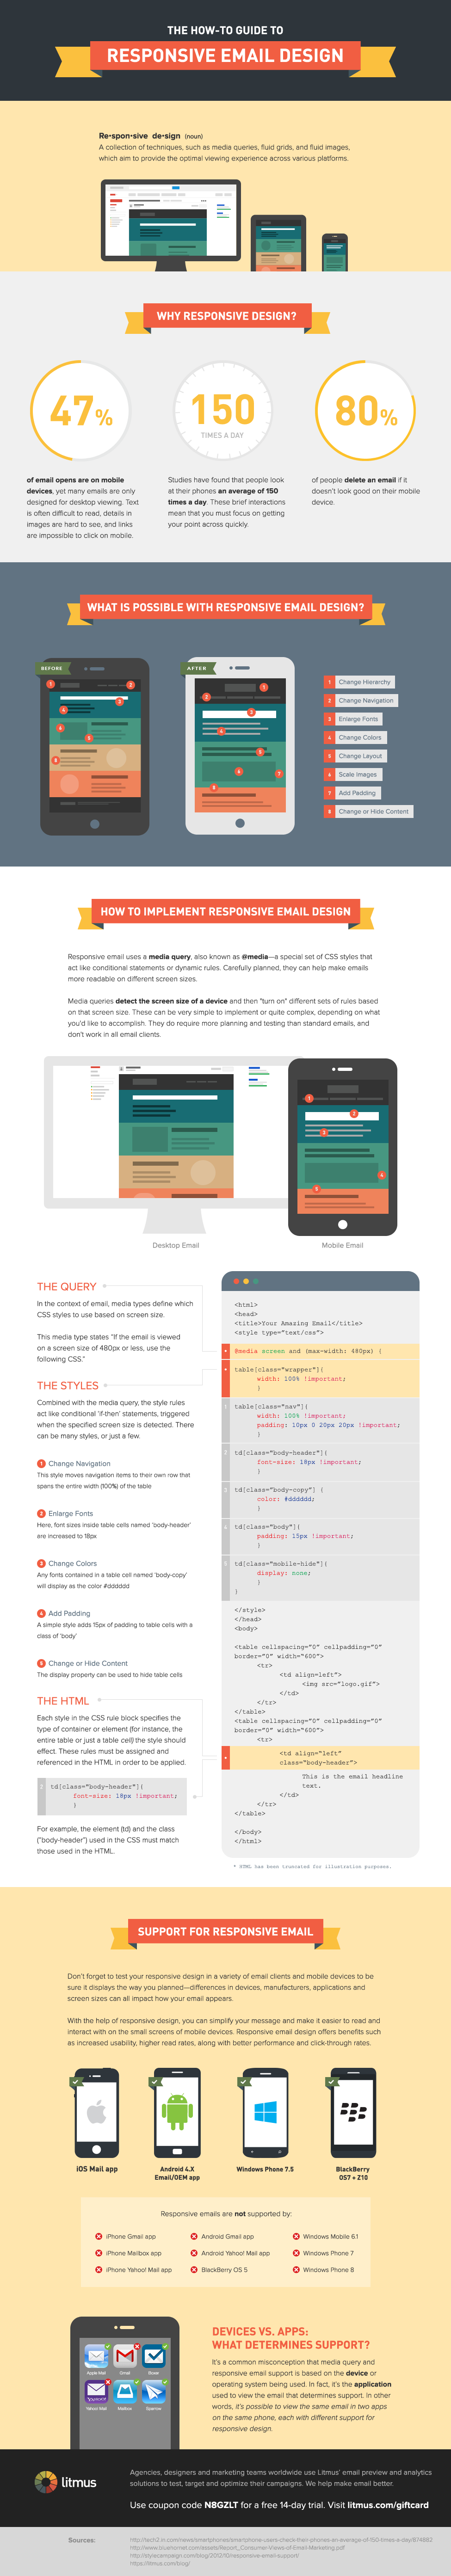 how-to-responsive-email-design-infographic